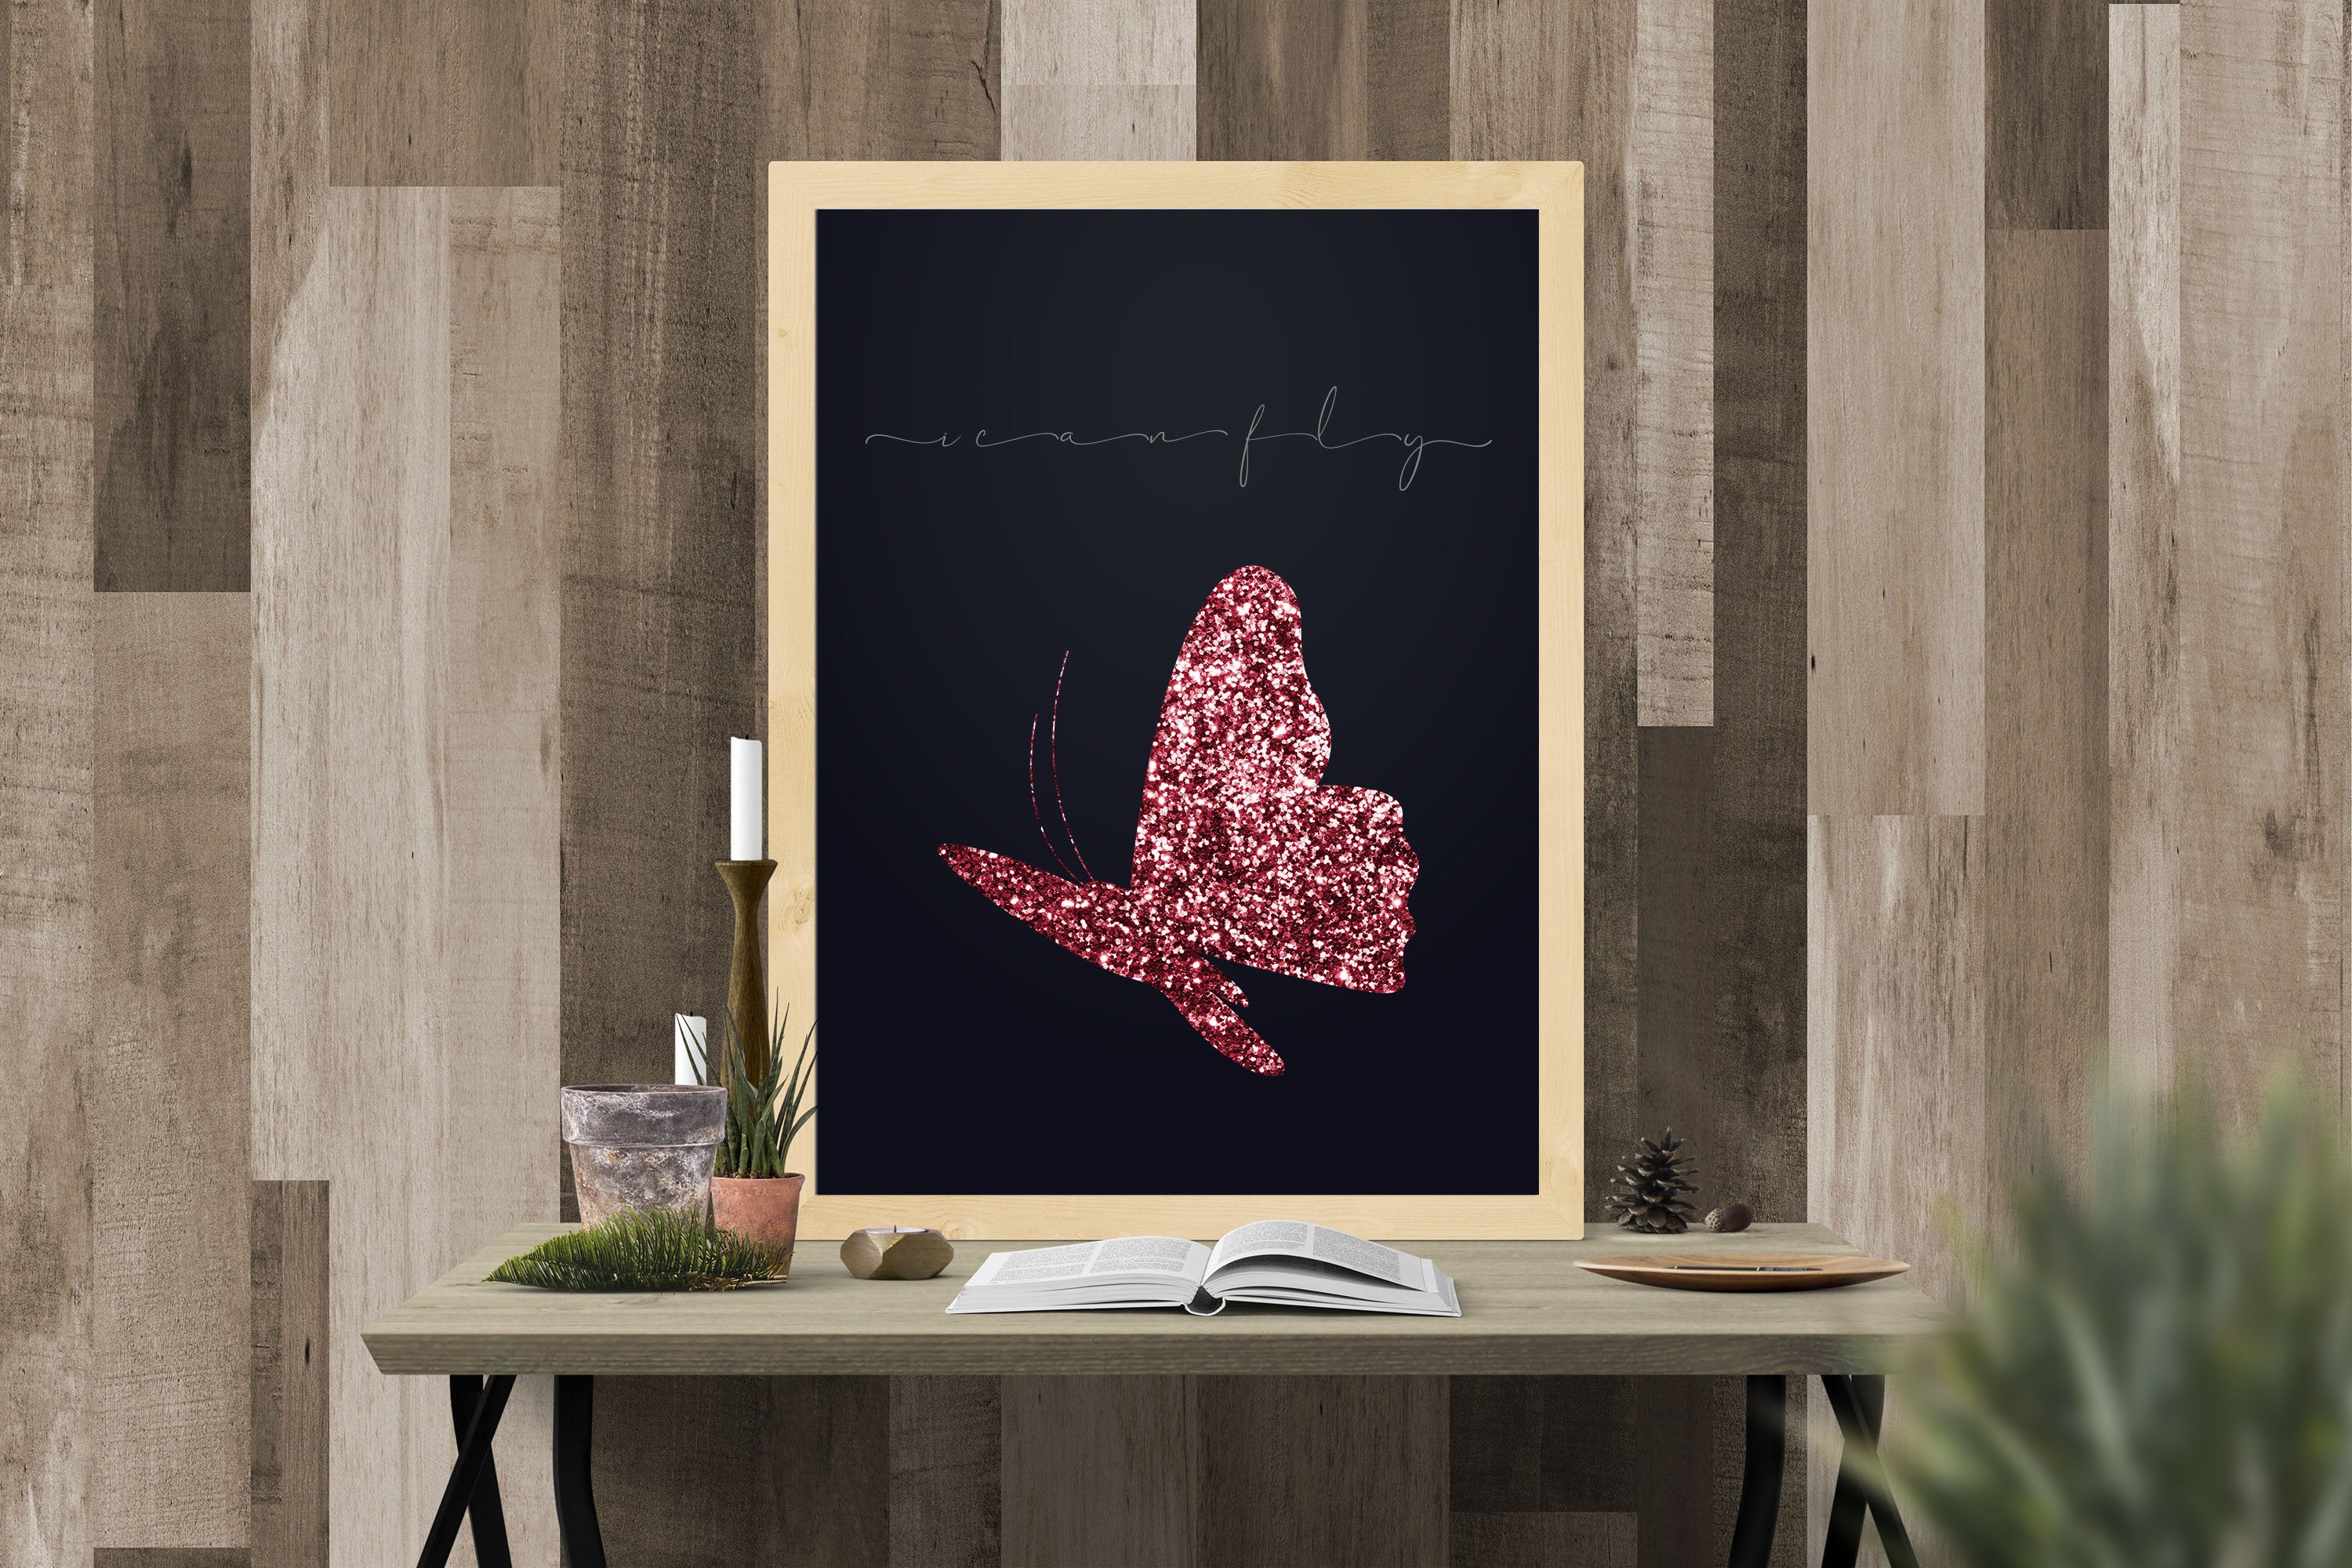 30 Red Ruby Foil and Glitter Butterfly Digital Images 300 Dpi Instant Download Commercial Use Metallic Wedding Card Making Flying Butterfly